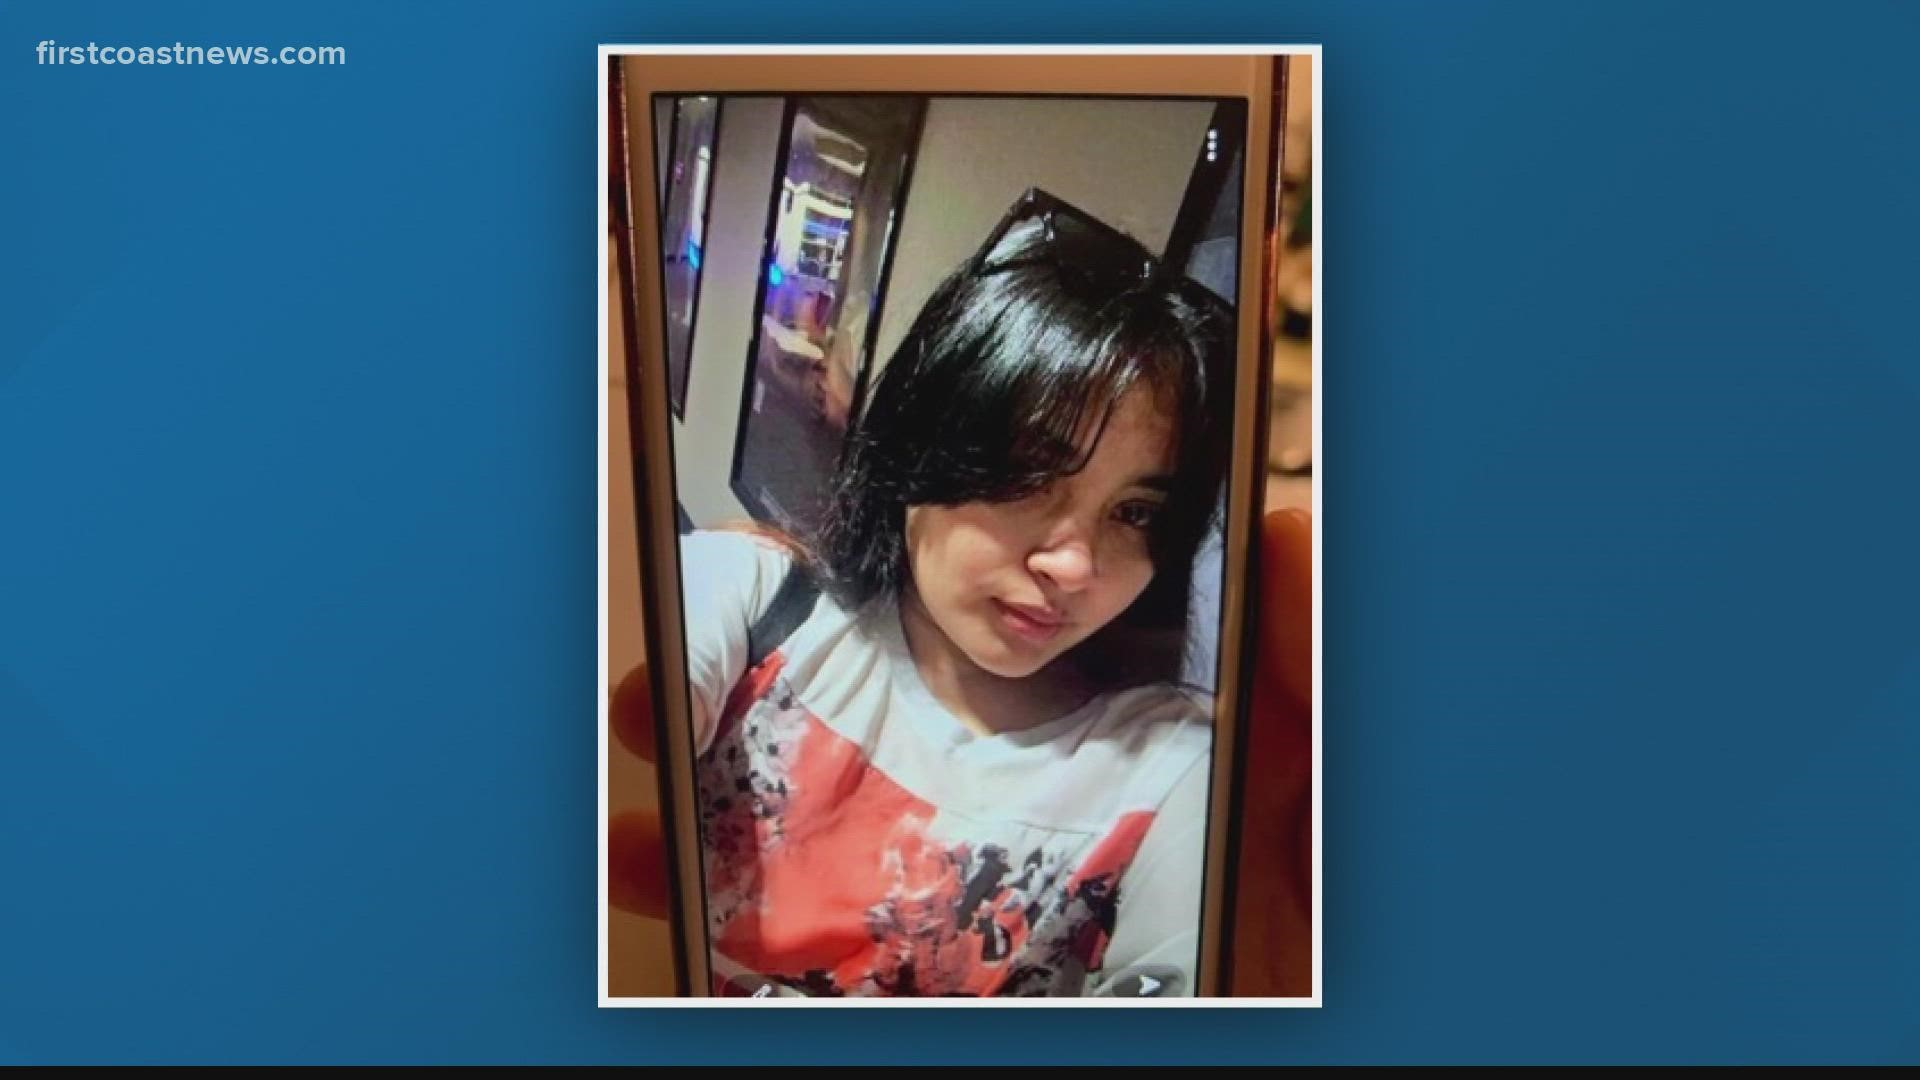 According to police, Dunia Pinto, 13, was last seen at about 3:30 a.m. in the Burgess Circle area. She was reported missing by her foster family at about 11 a.m.